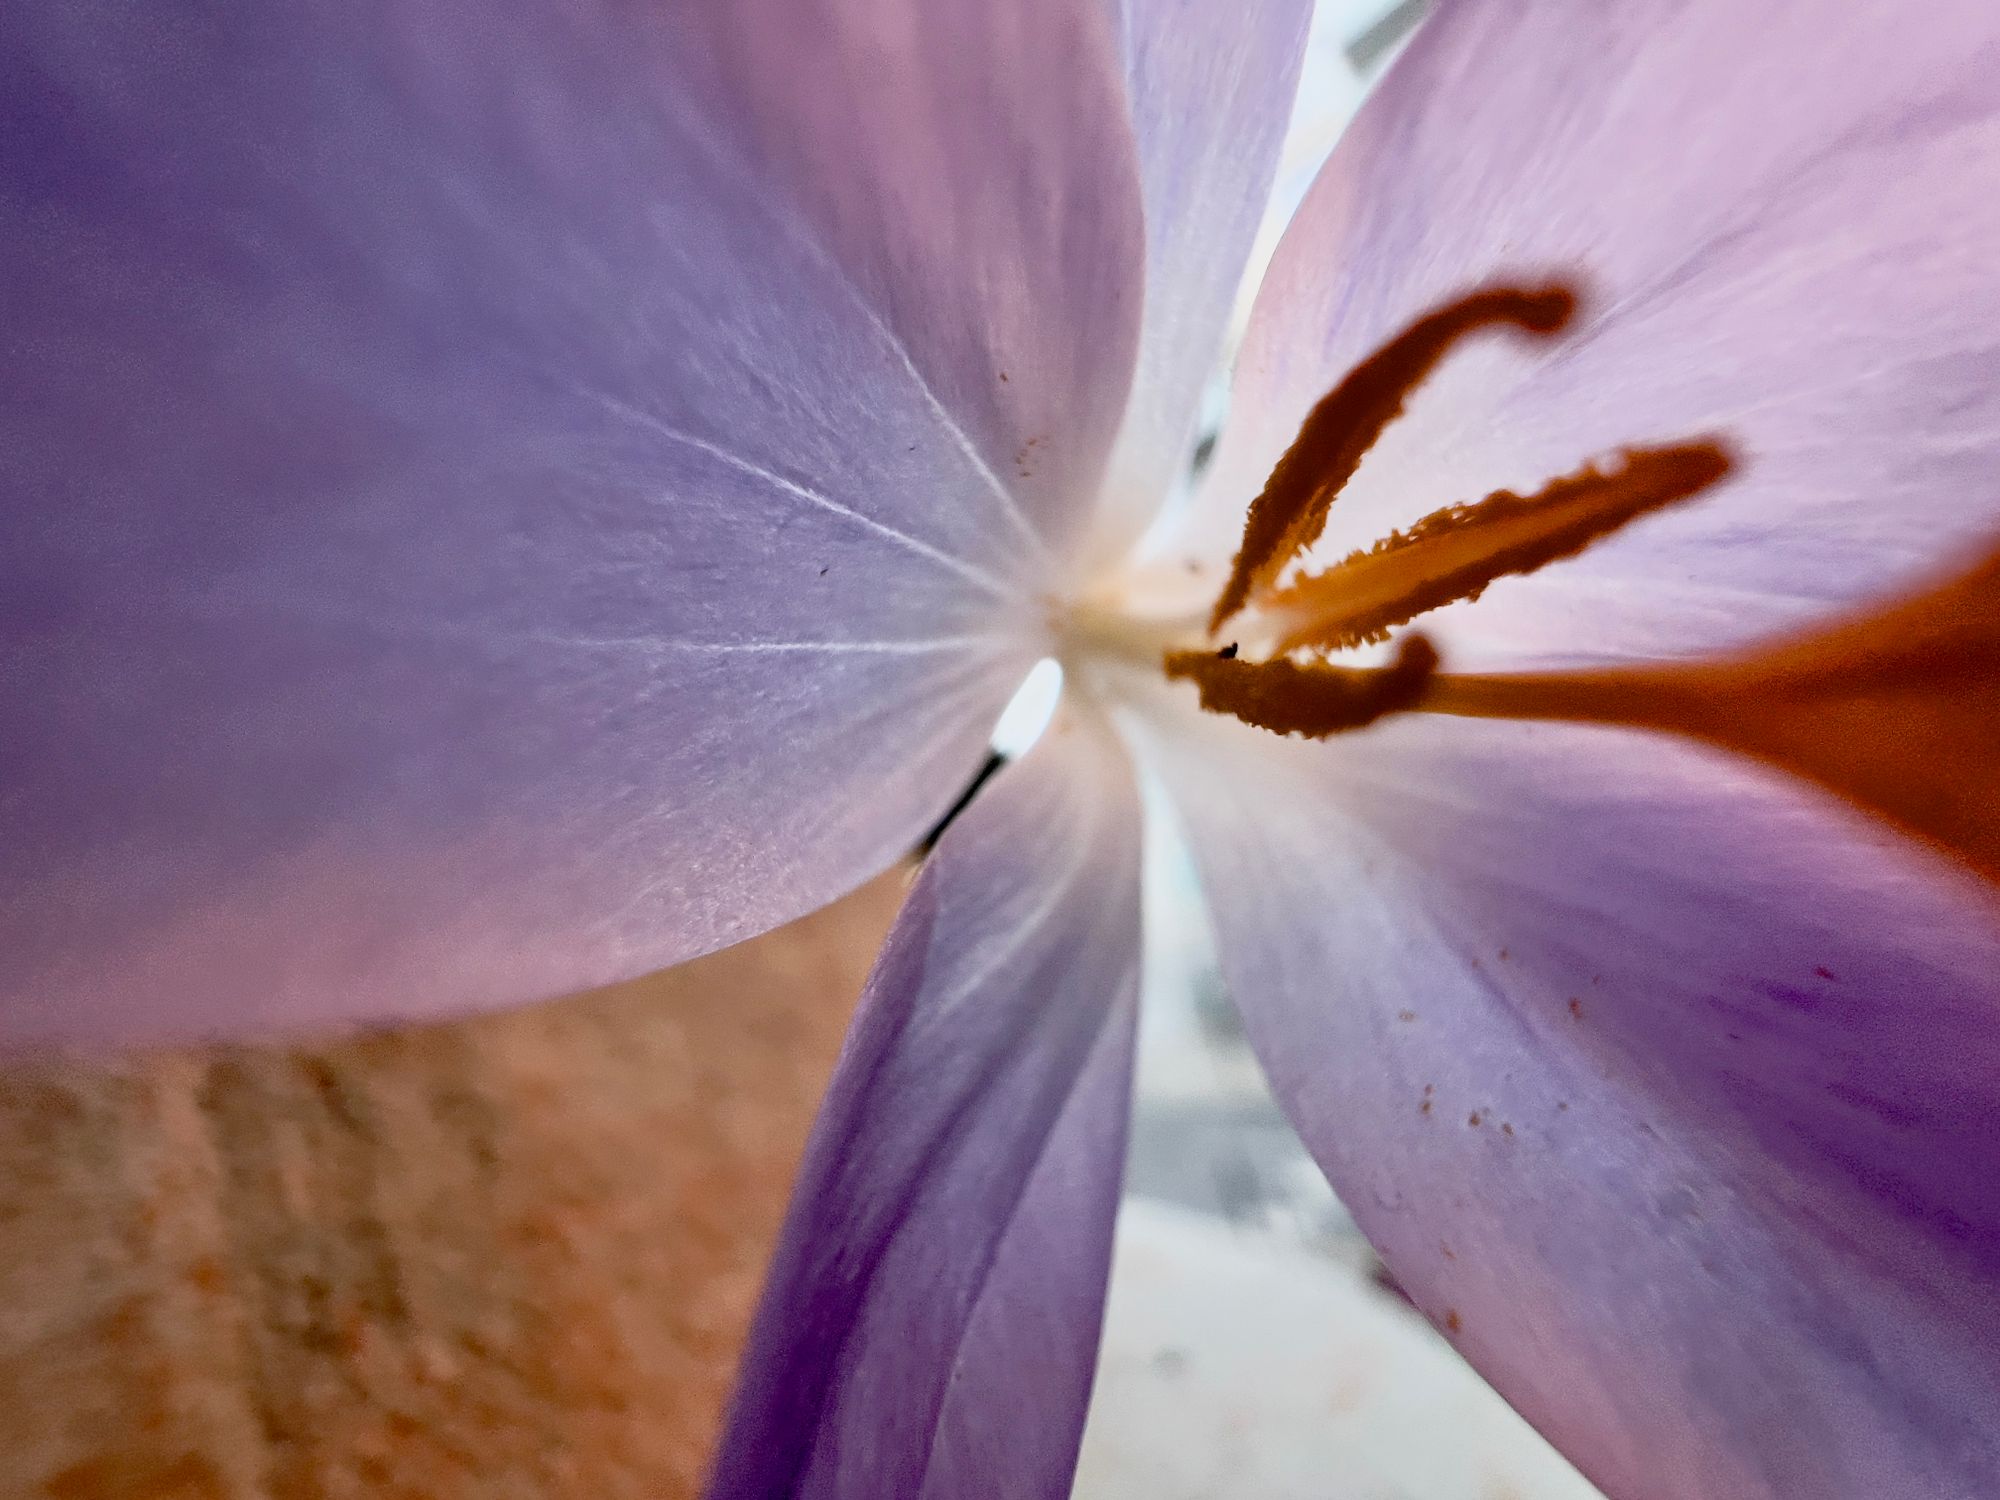 An extreme close-up on a purple crocus with orange-brown stamen in a rough terracotta pot.